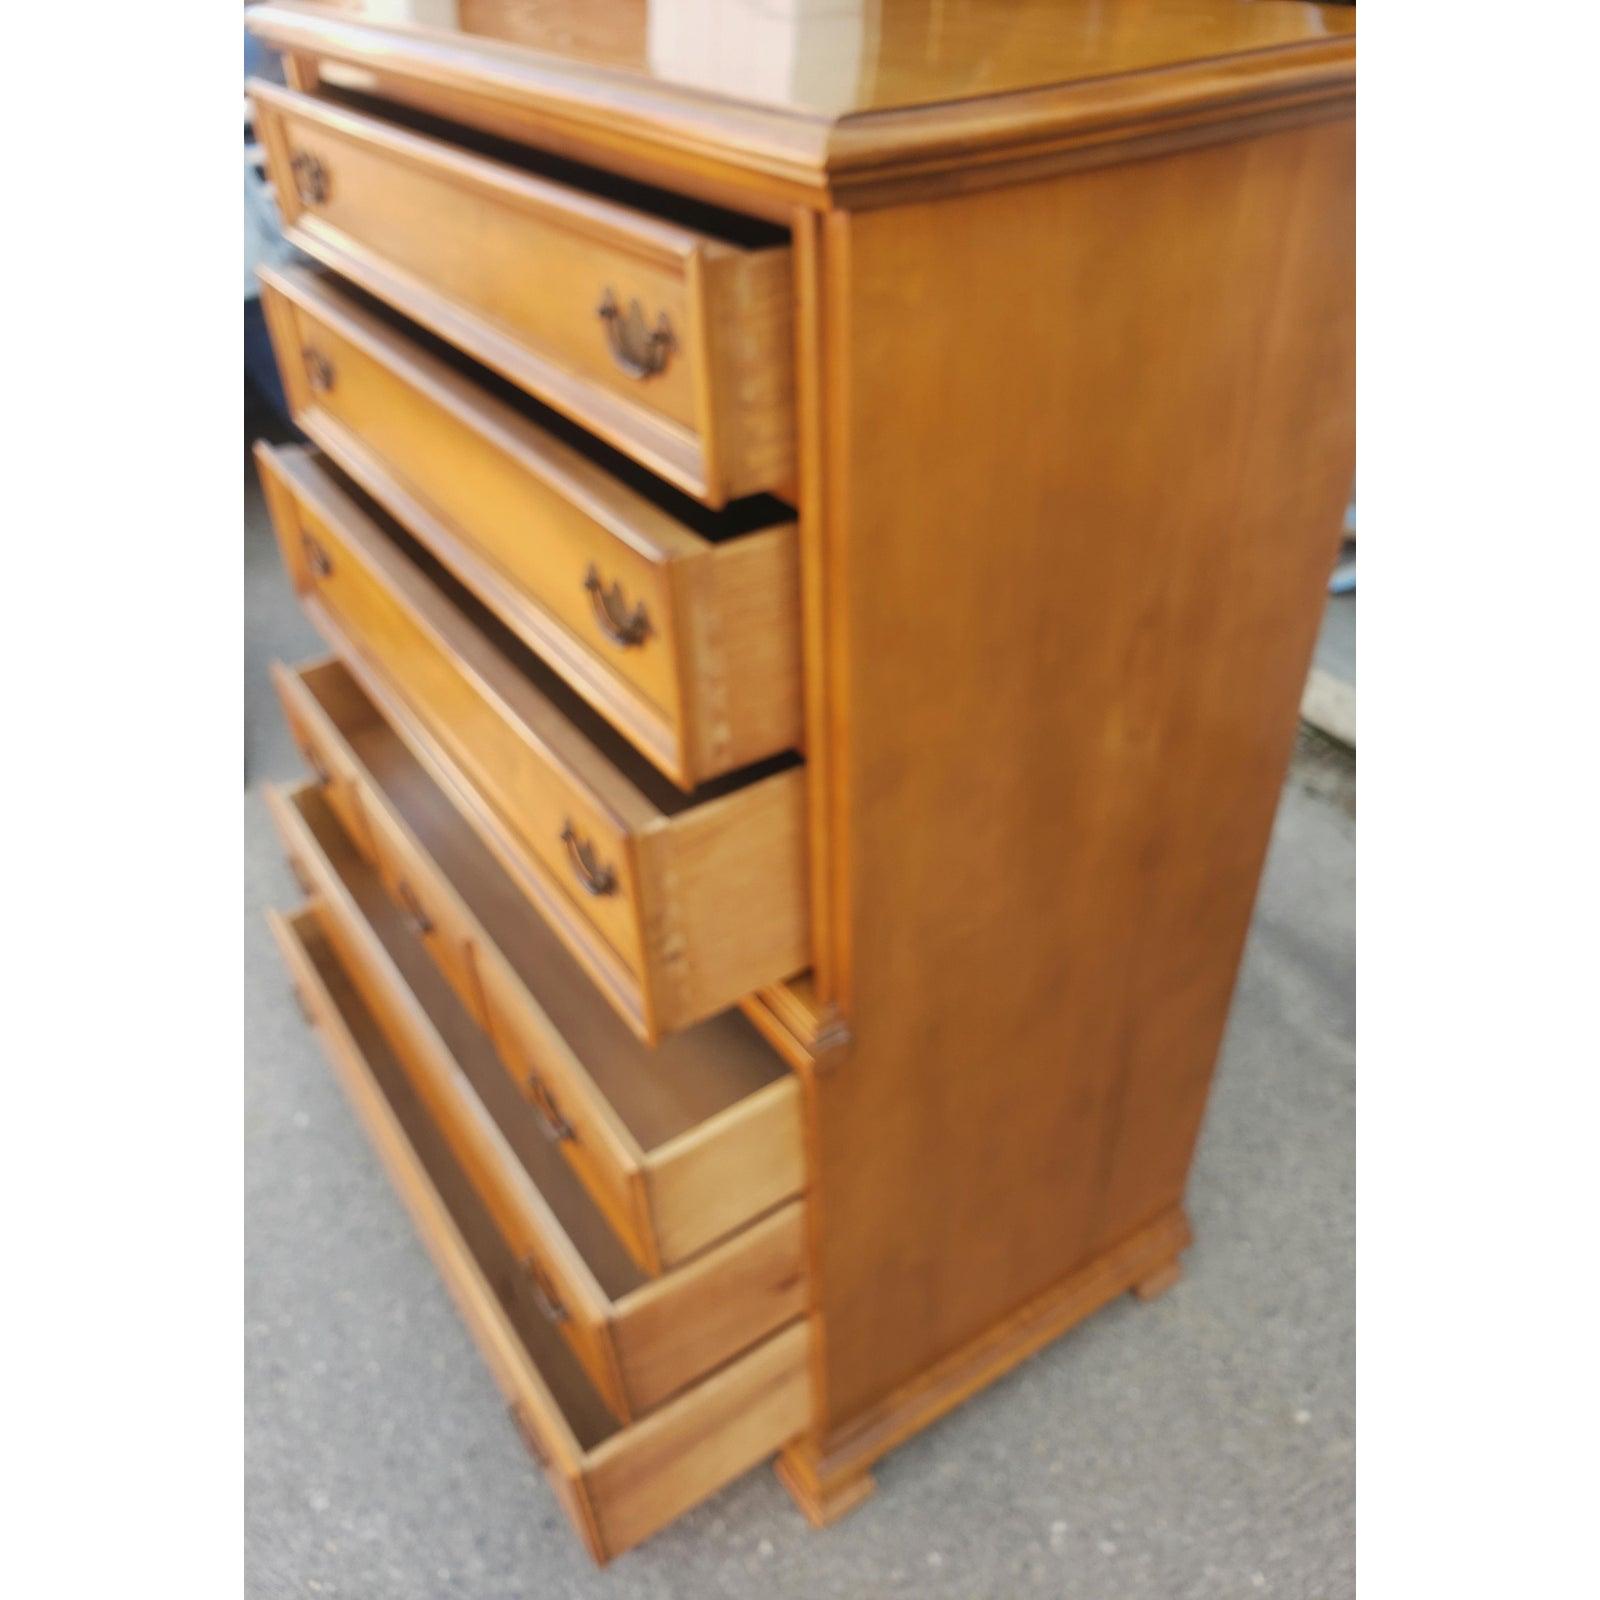 Mid Century Modern solid maple chest of drawers from Cherokee Furniture with six drawer dresser.
This chest of drawers measures 38” in width x 19 1/2”in depth x 50” in height.
All drawers work as originally intended. Very Solid